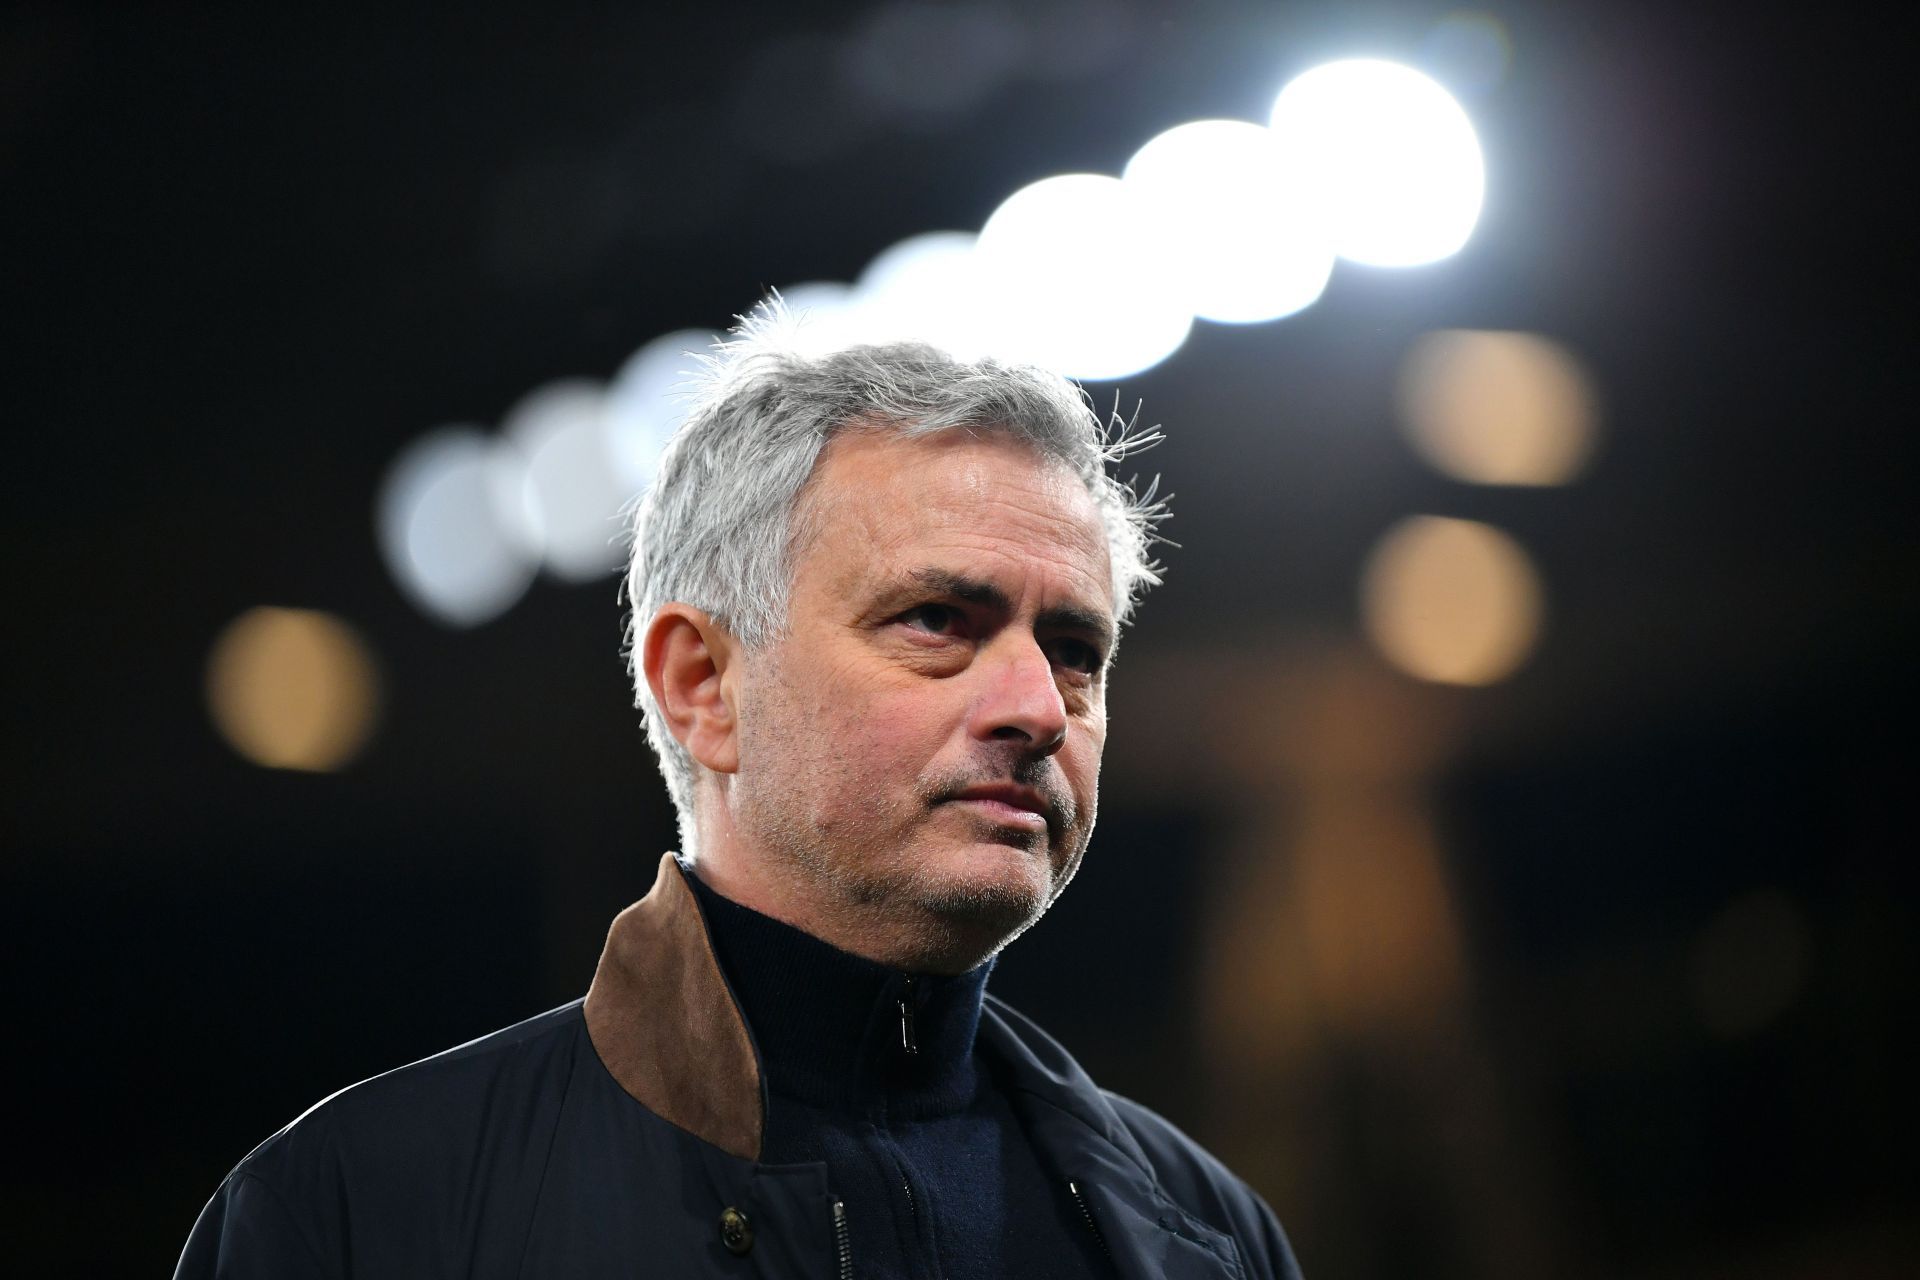 Jose Mourinho is one of the most successful managers in the history of football.